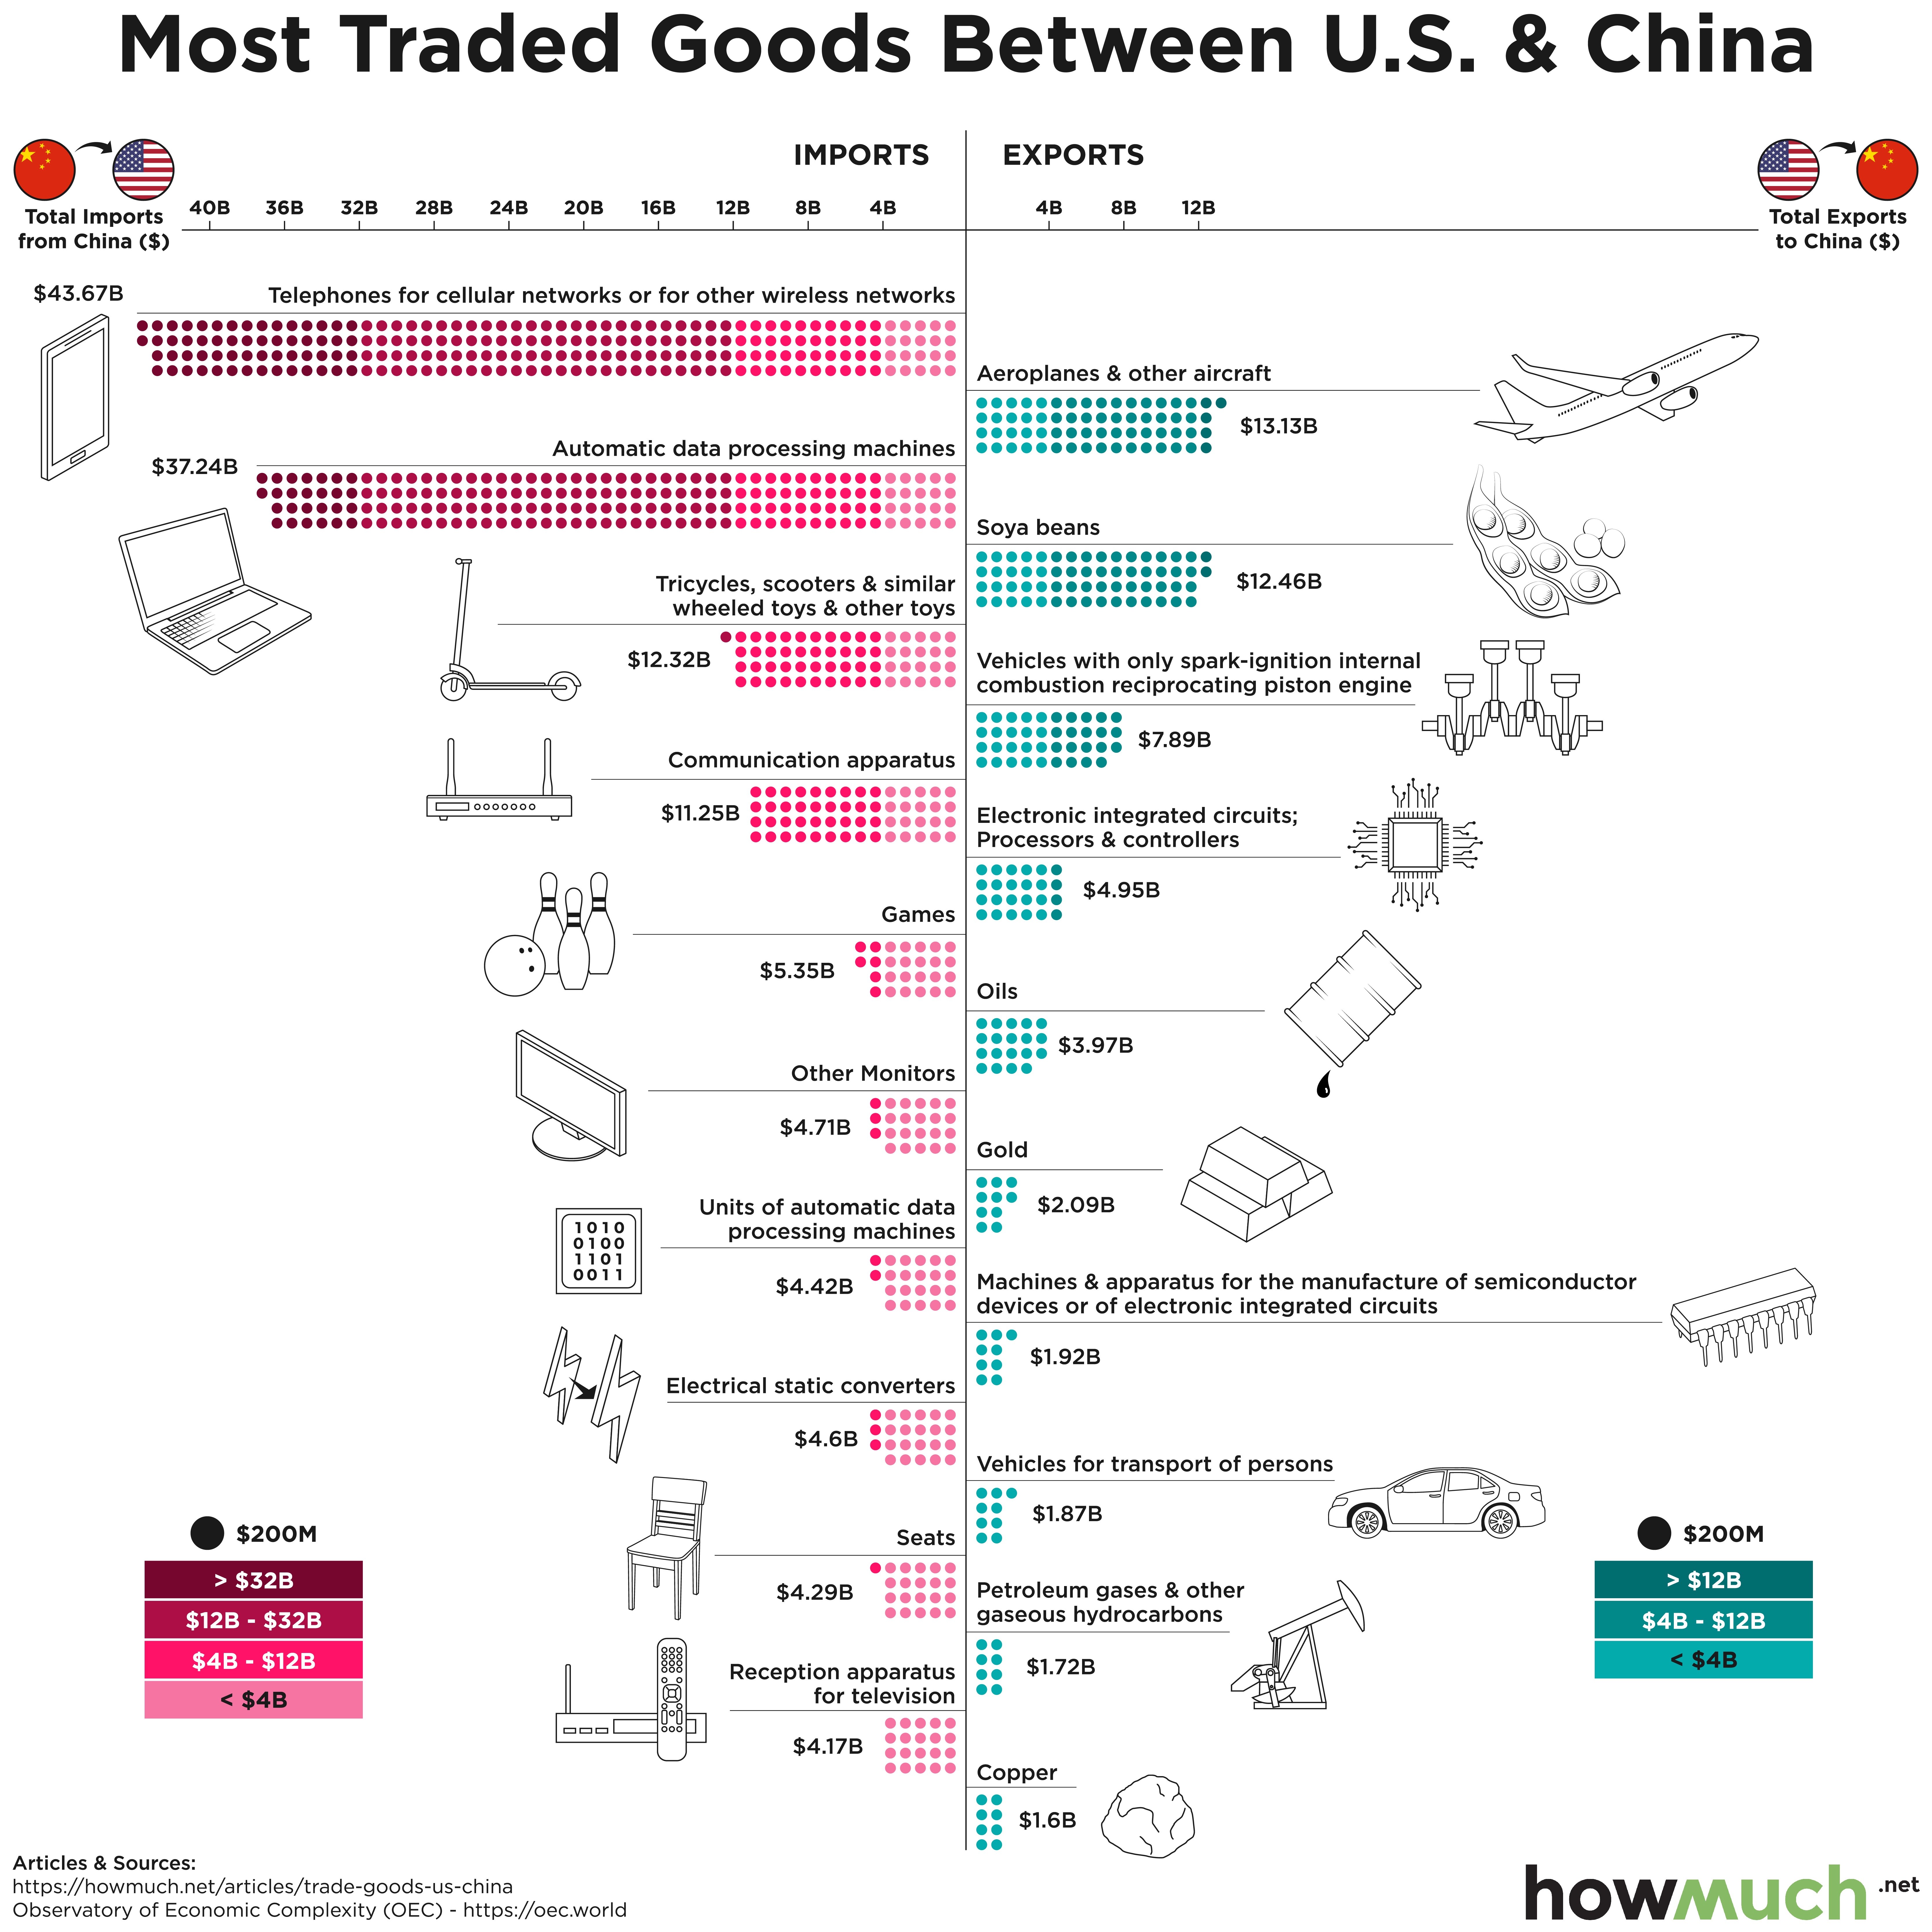 Whats-Traded-Between-US-and-China-300dpi-e3ad.jpg